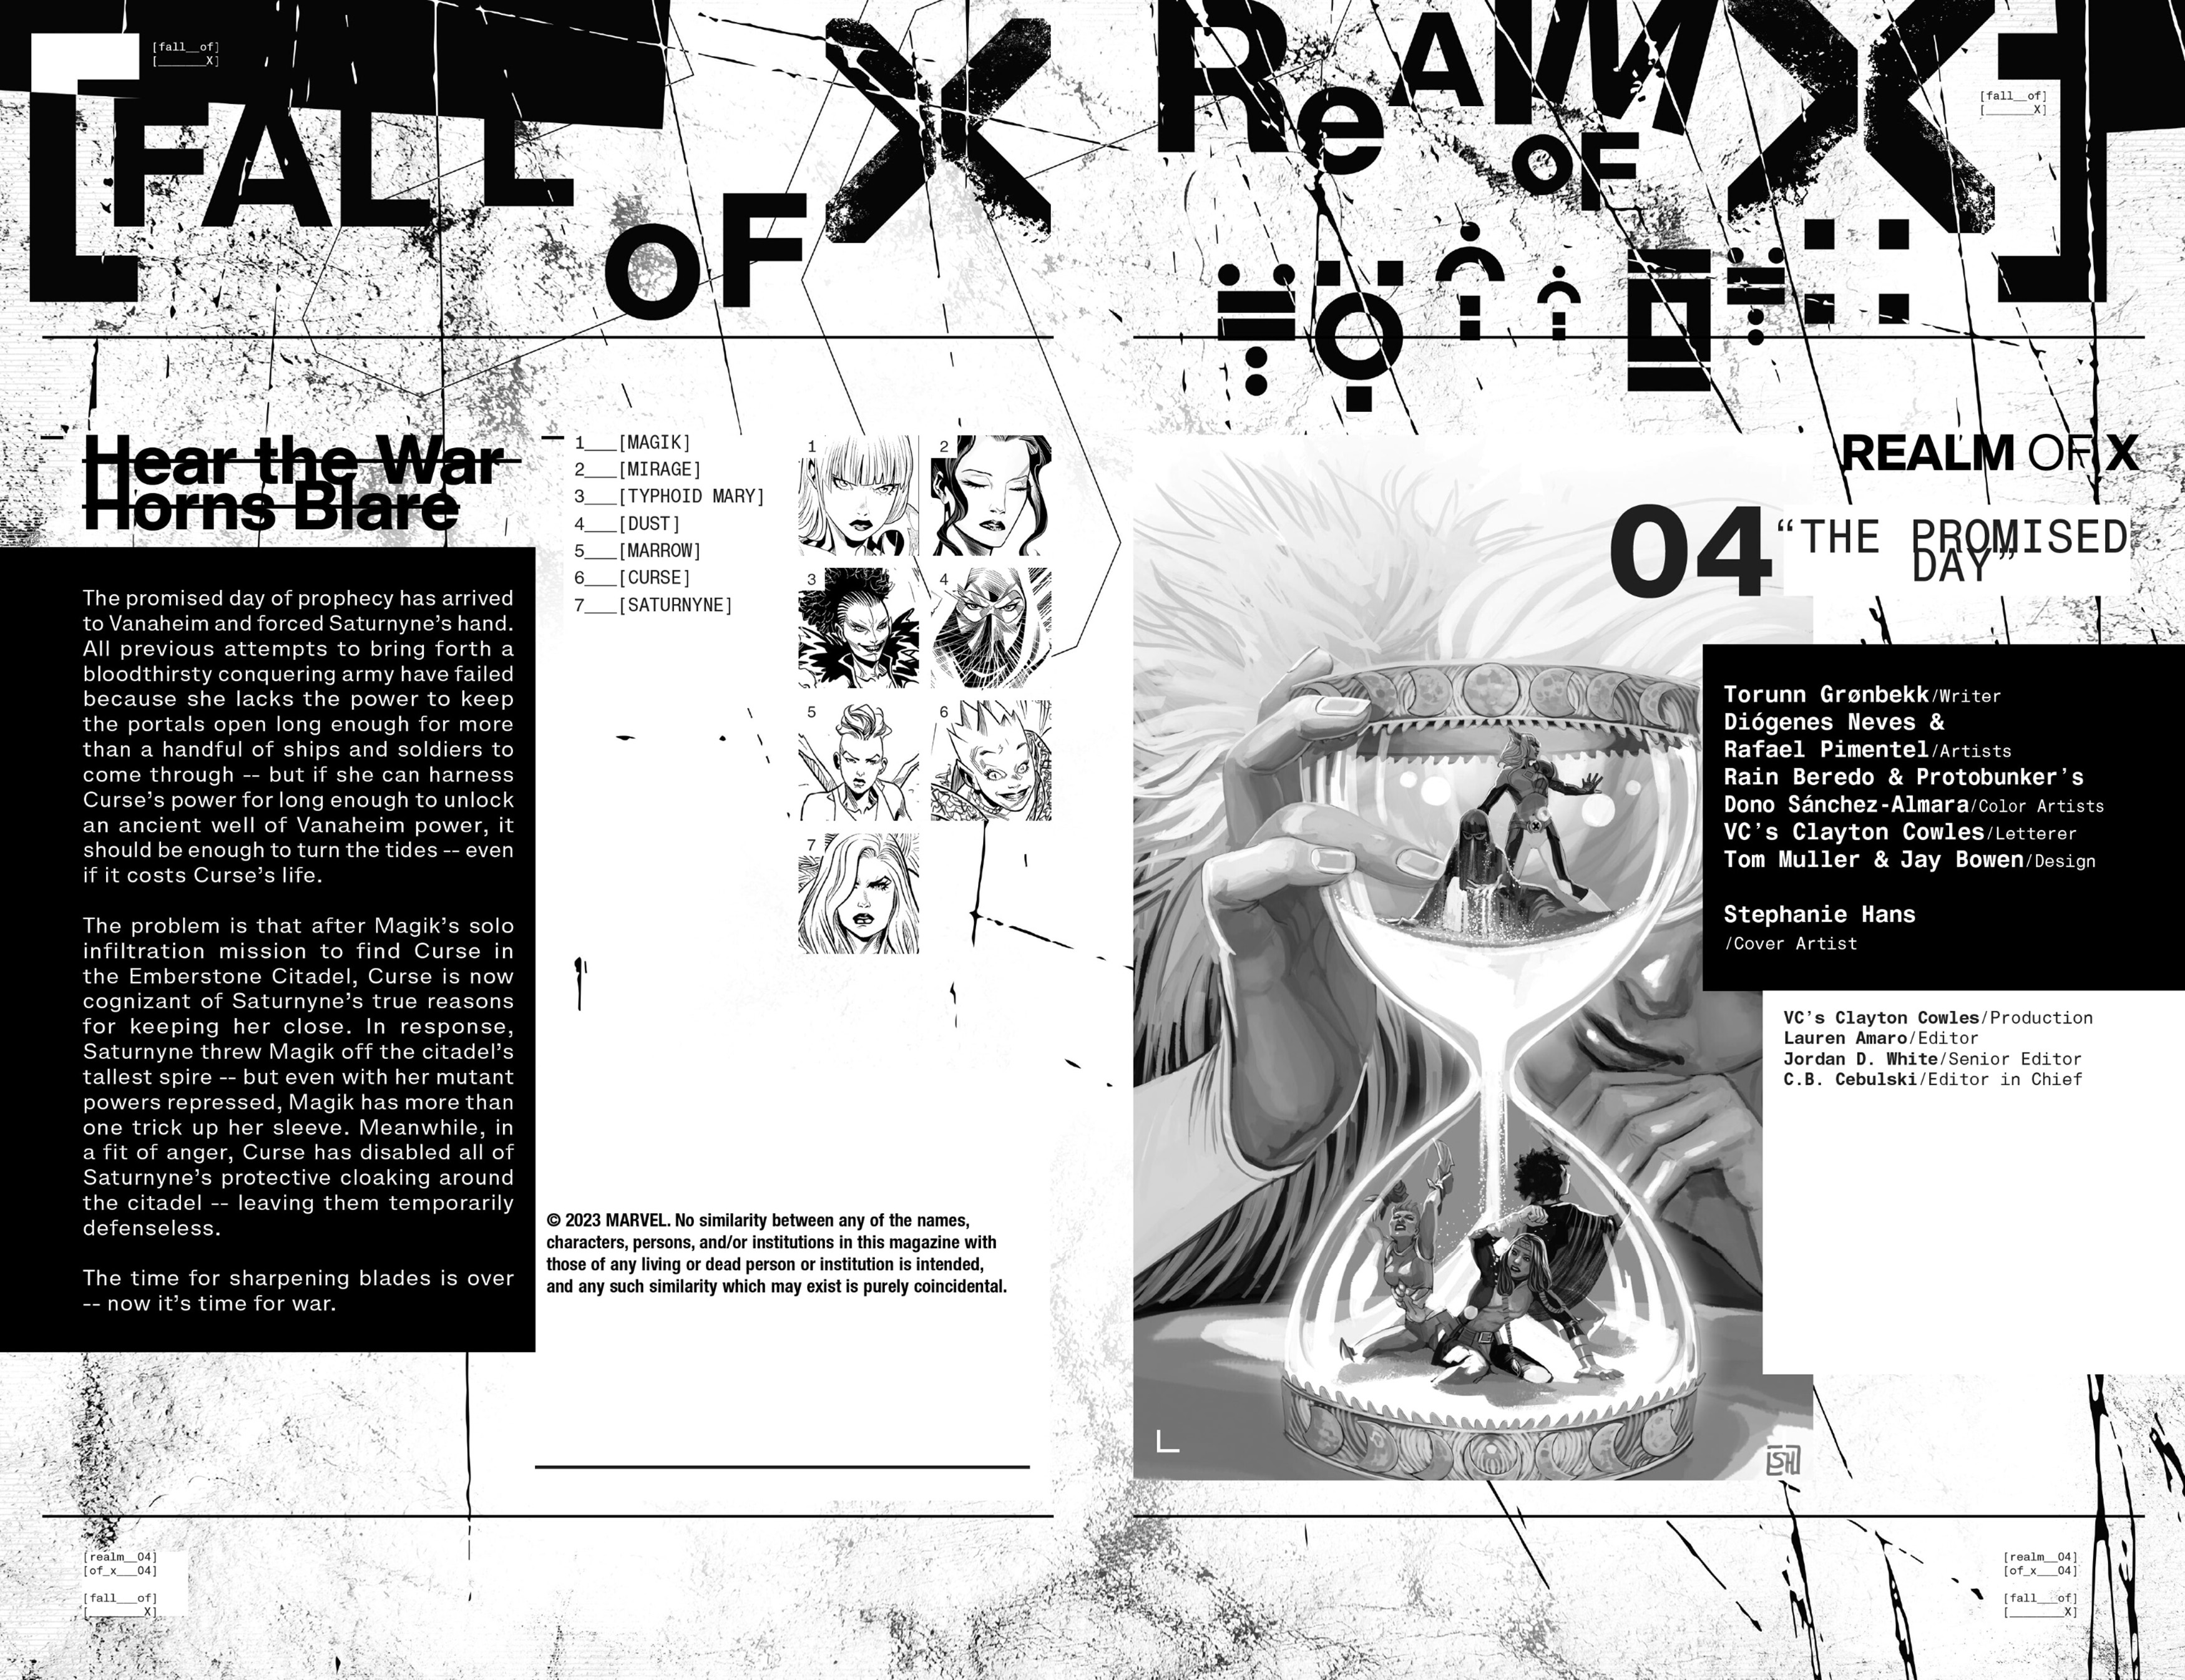 Read online Realm of X comic -  Issue #4 - 3